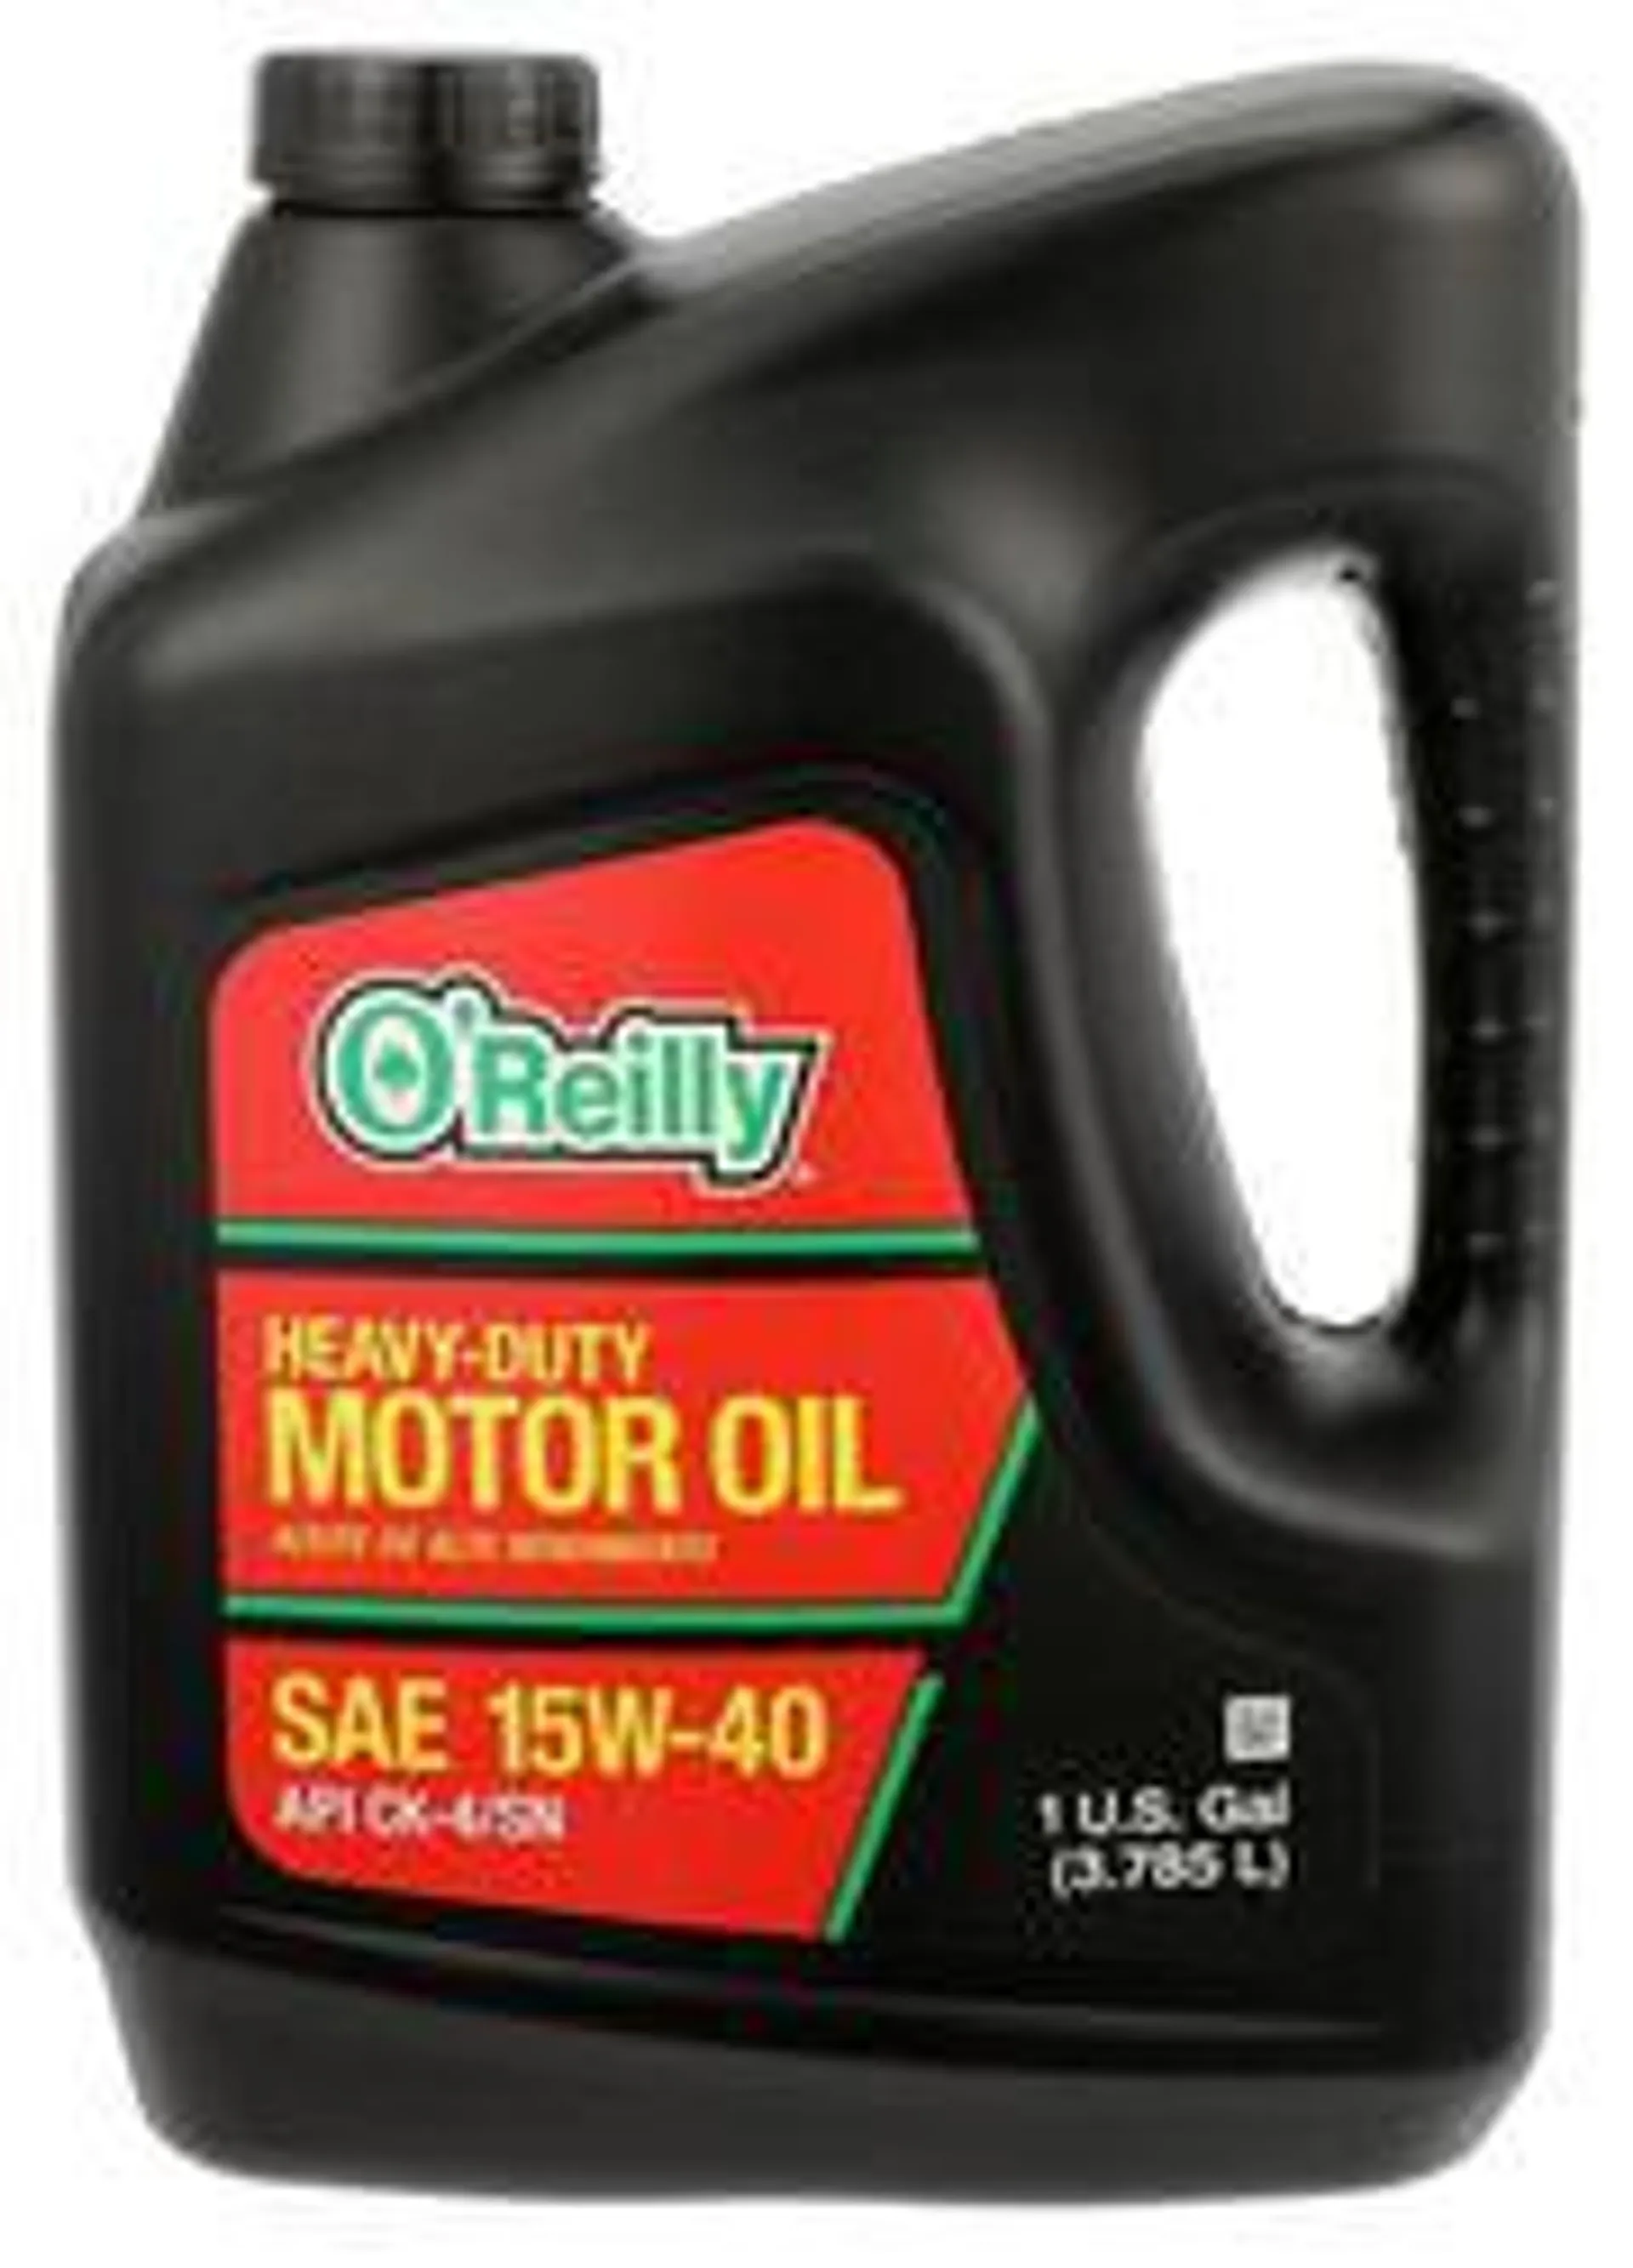 O'Reilly Conventional Diesel Motor Oil 15W-40 1 Gallon - 15-40-1